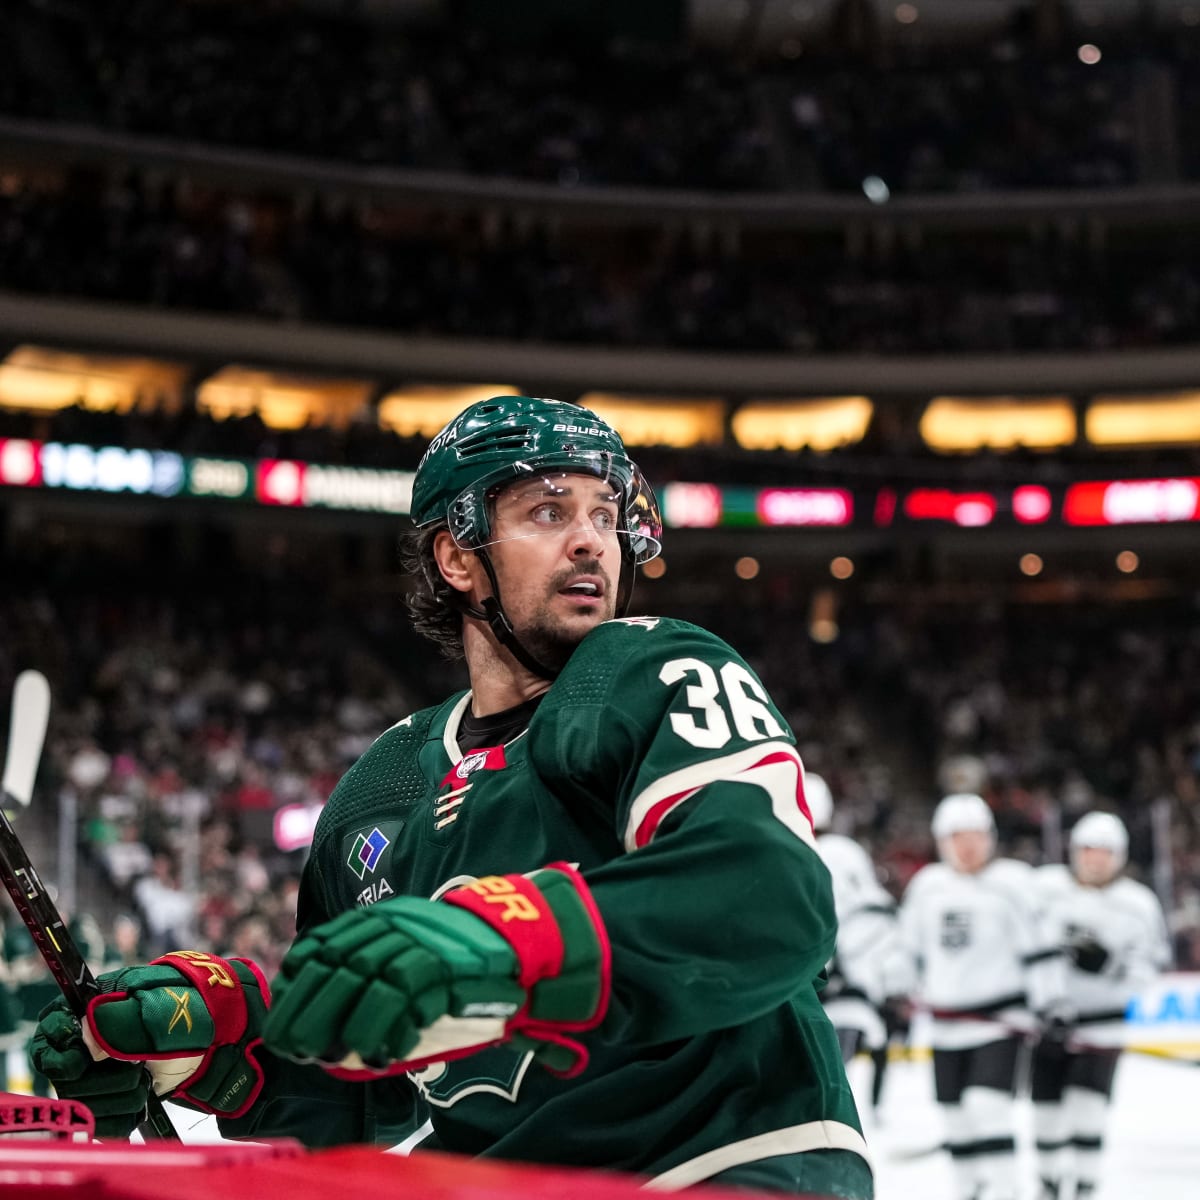 Marathon shift was only part of Jon Merrill's busy night for Wild